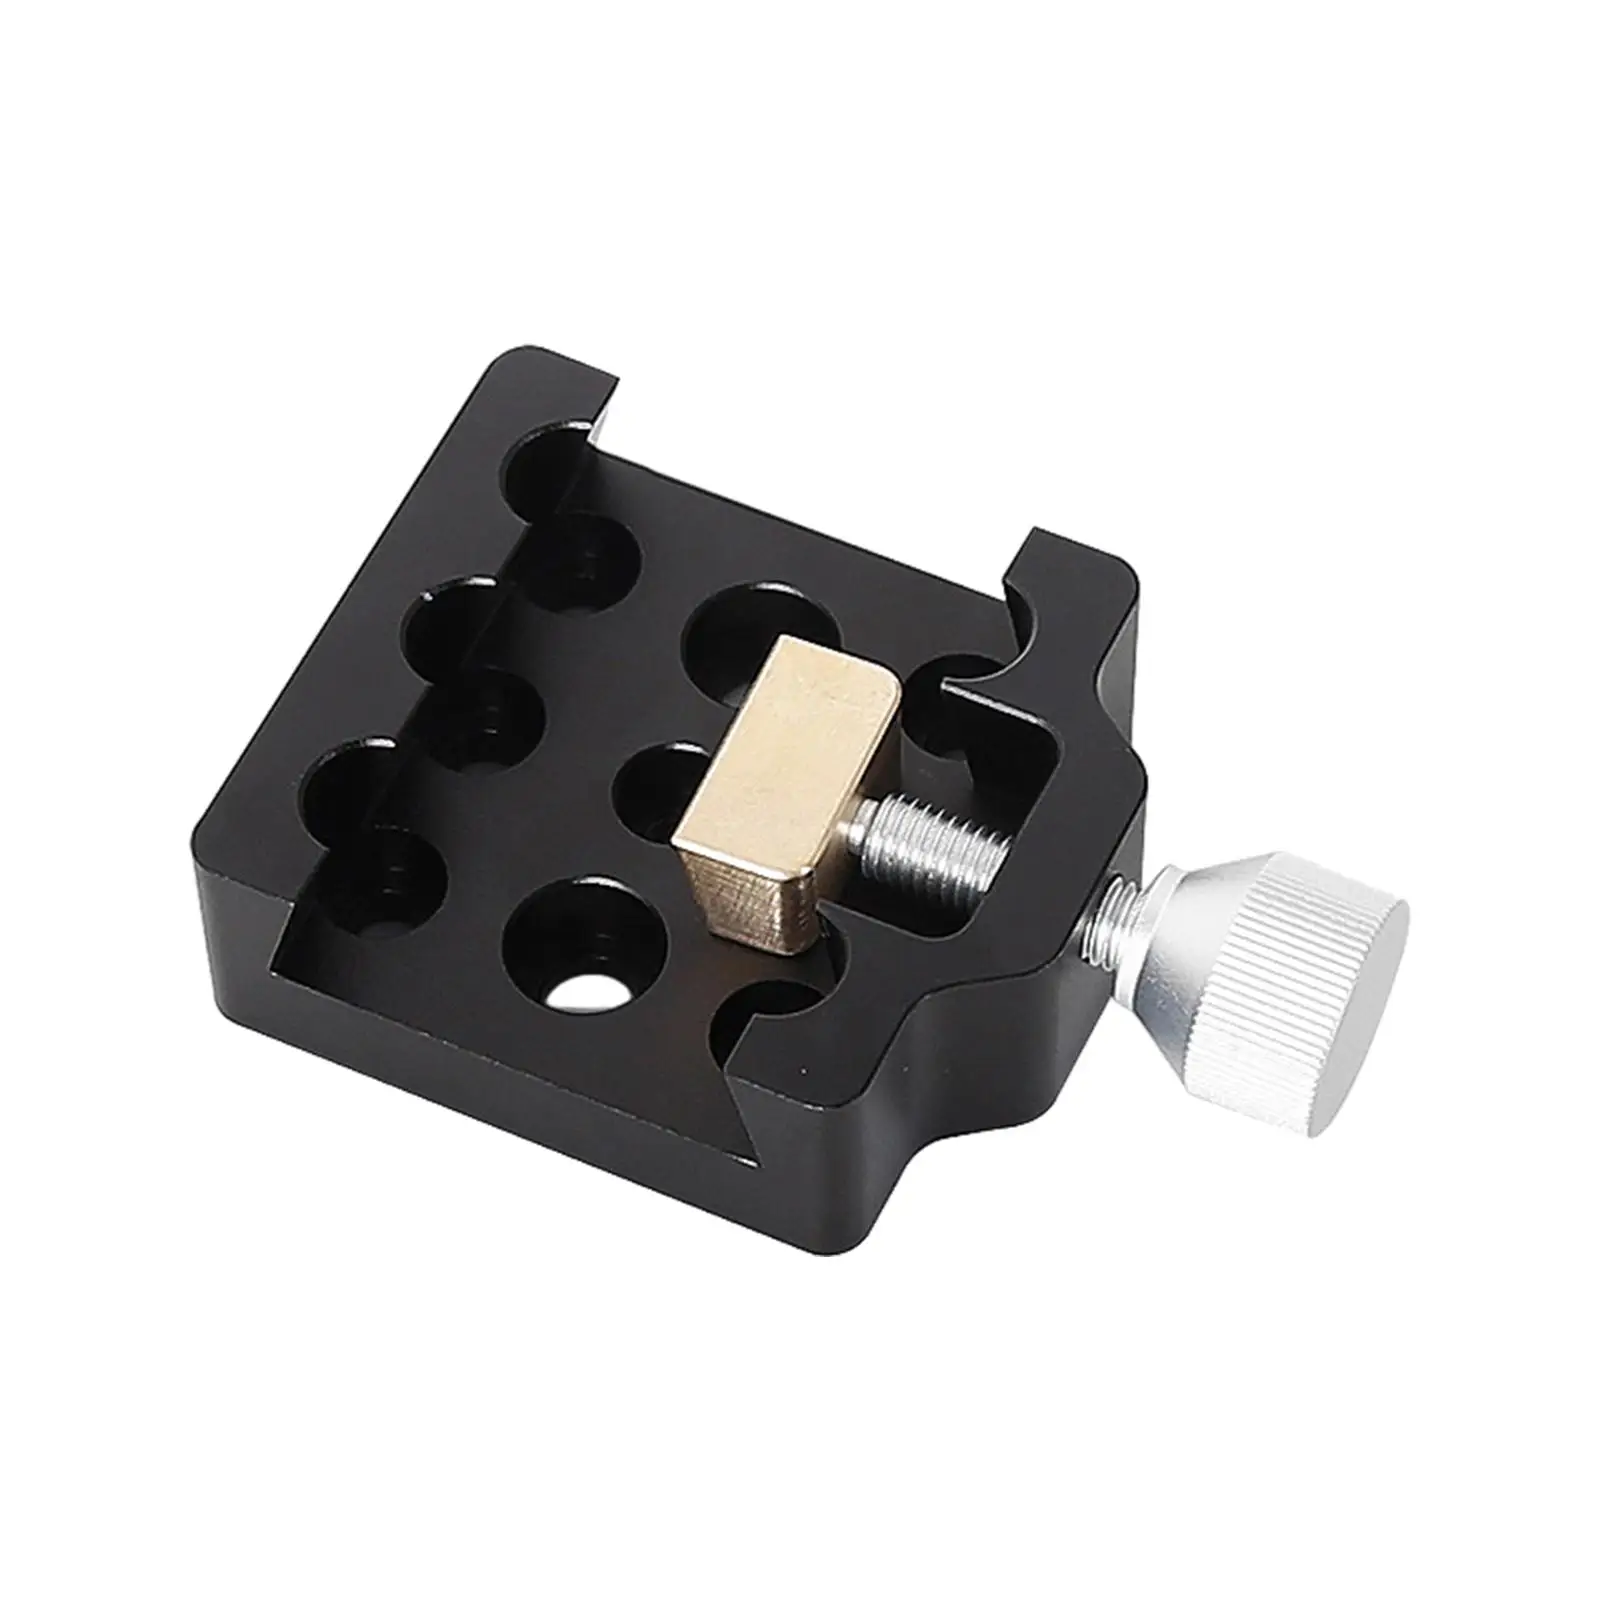 Telescope Scope Adapter Mount Base Metal Universal for Astronomical Tripod